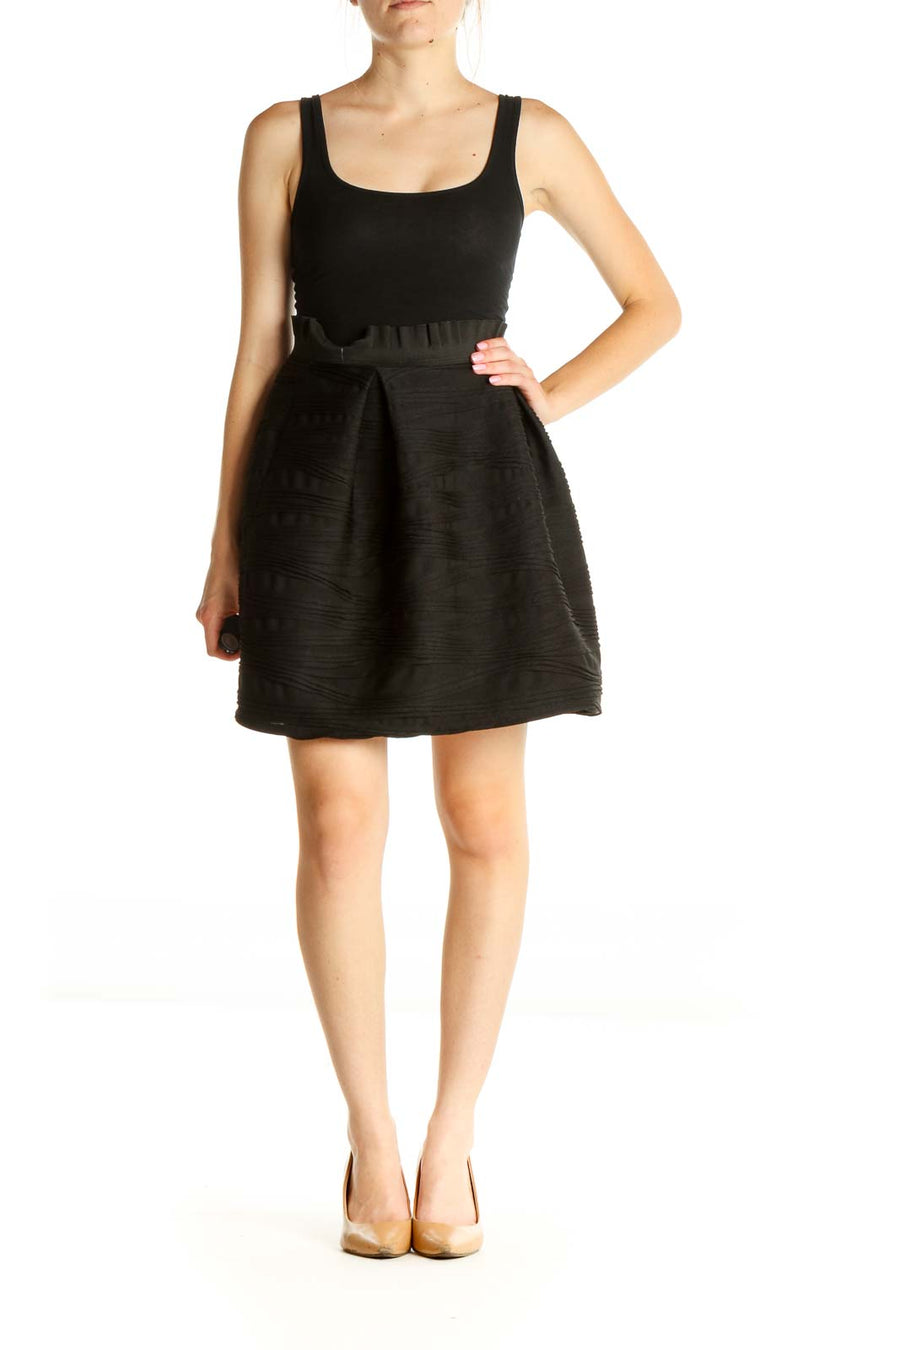 Black Solid Chic Flared Skirt